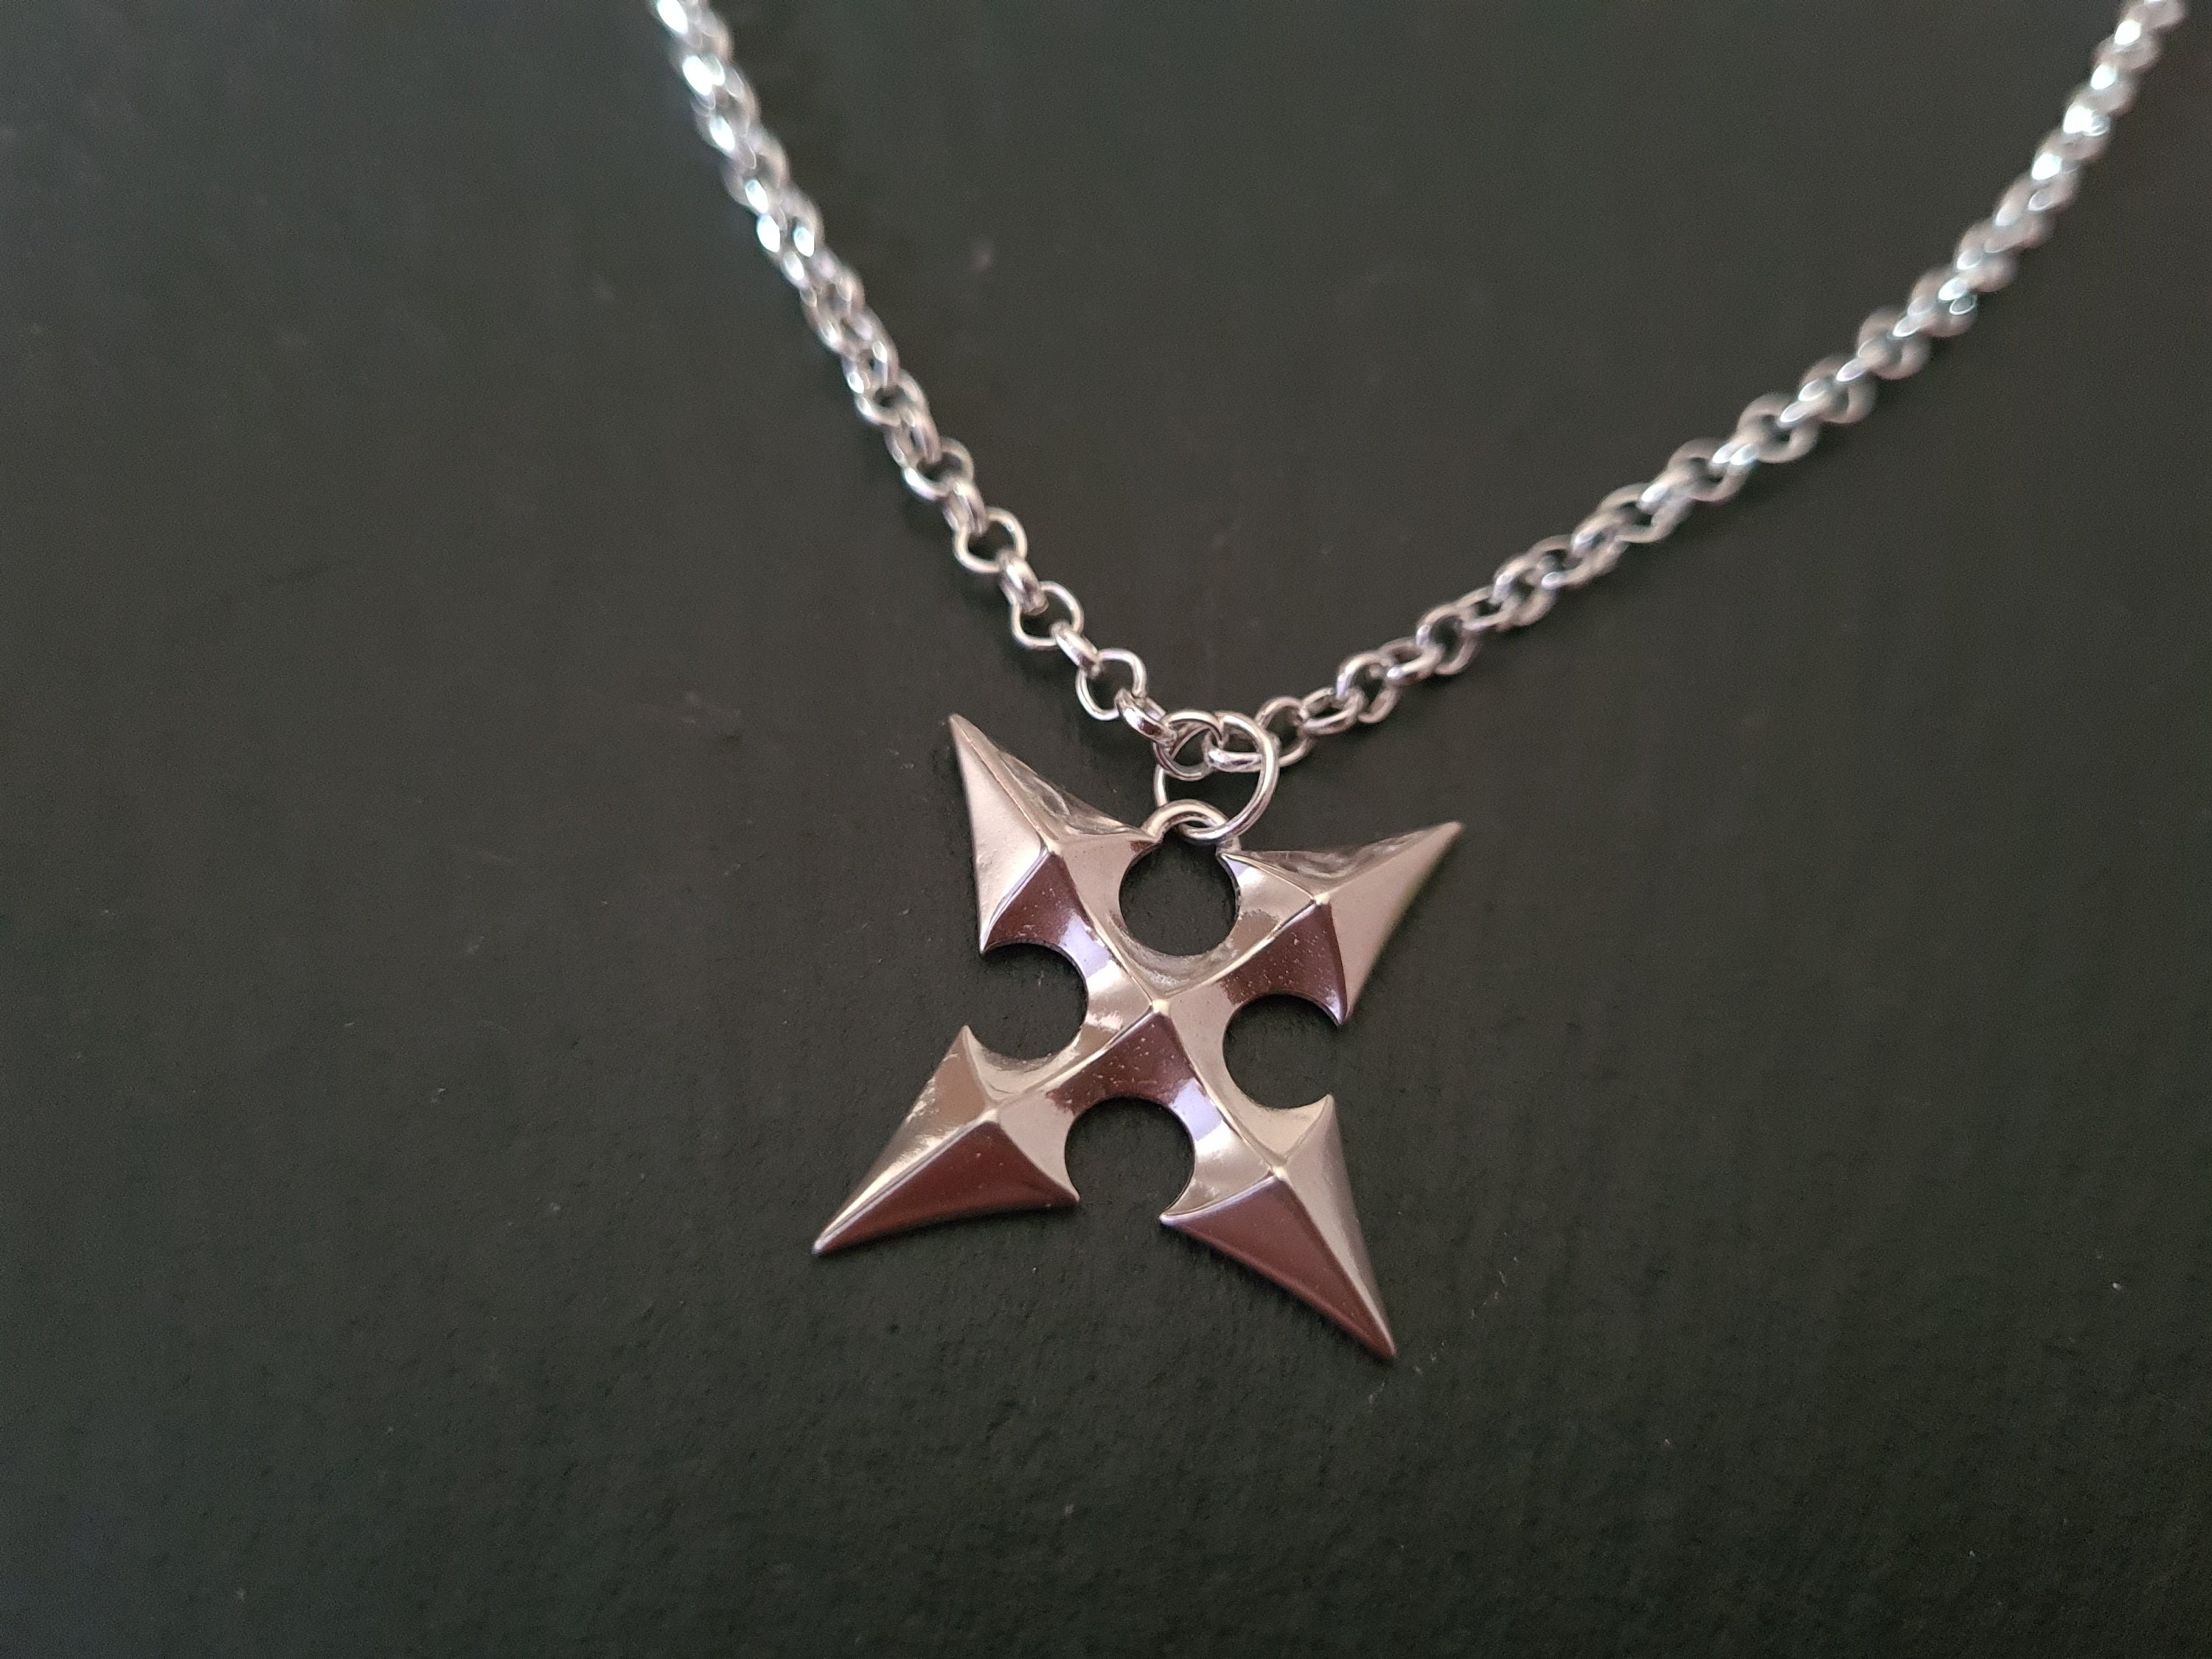 Xcoser Anime Kingdom Hearts Necklace Series Sets 2 Jewelry Silver